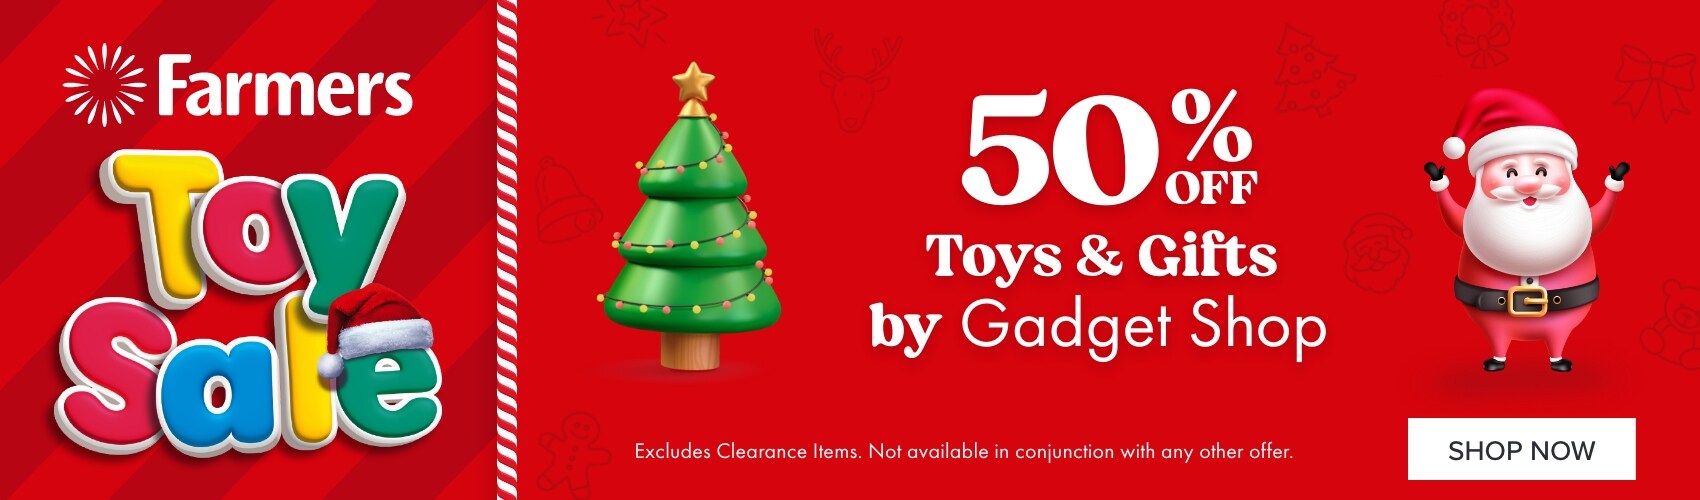 50% OFF Toys & Gifts by Gadget Shop